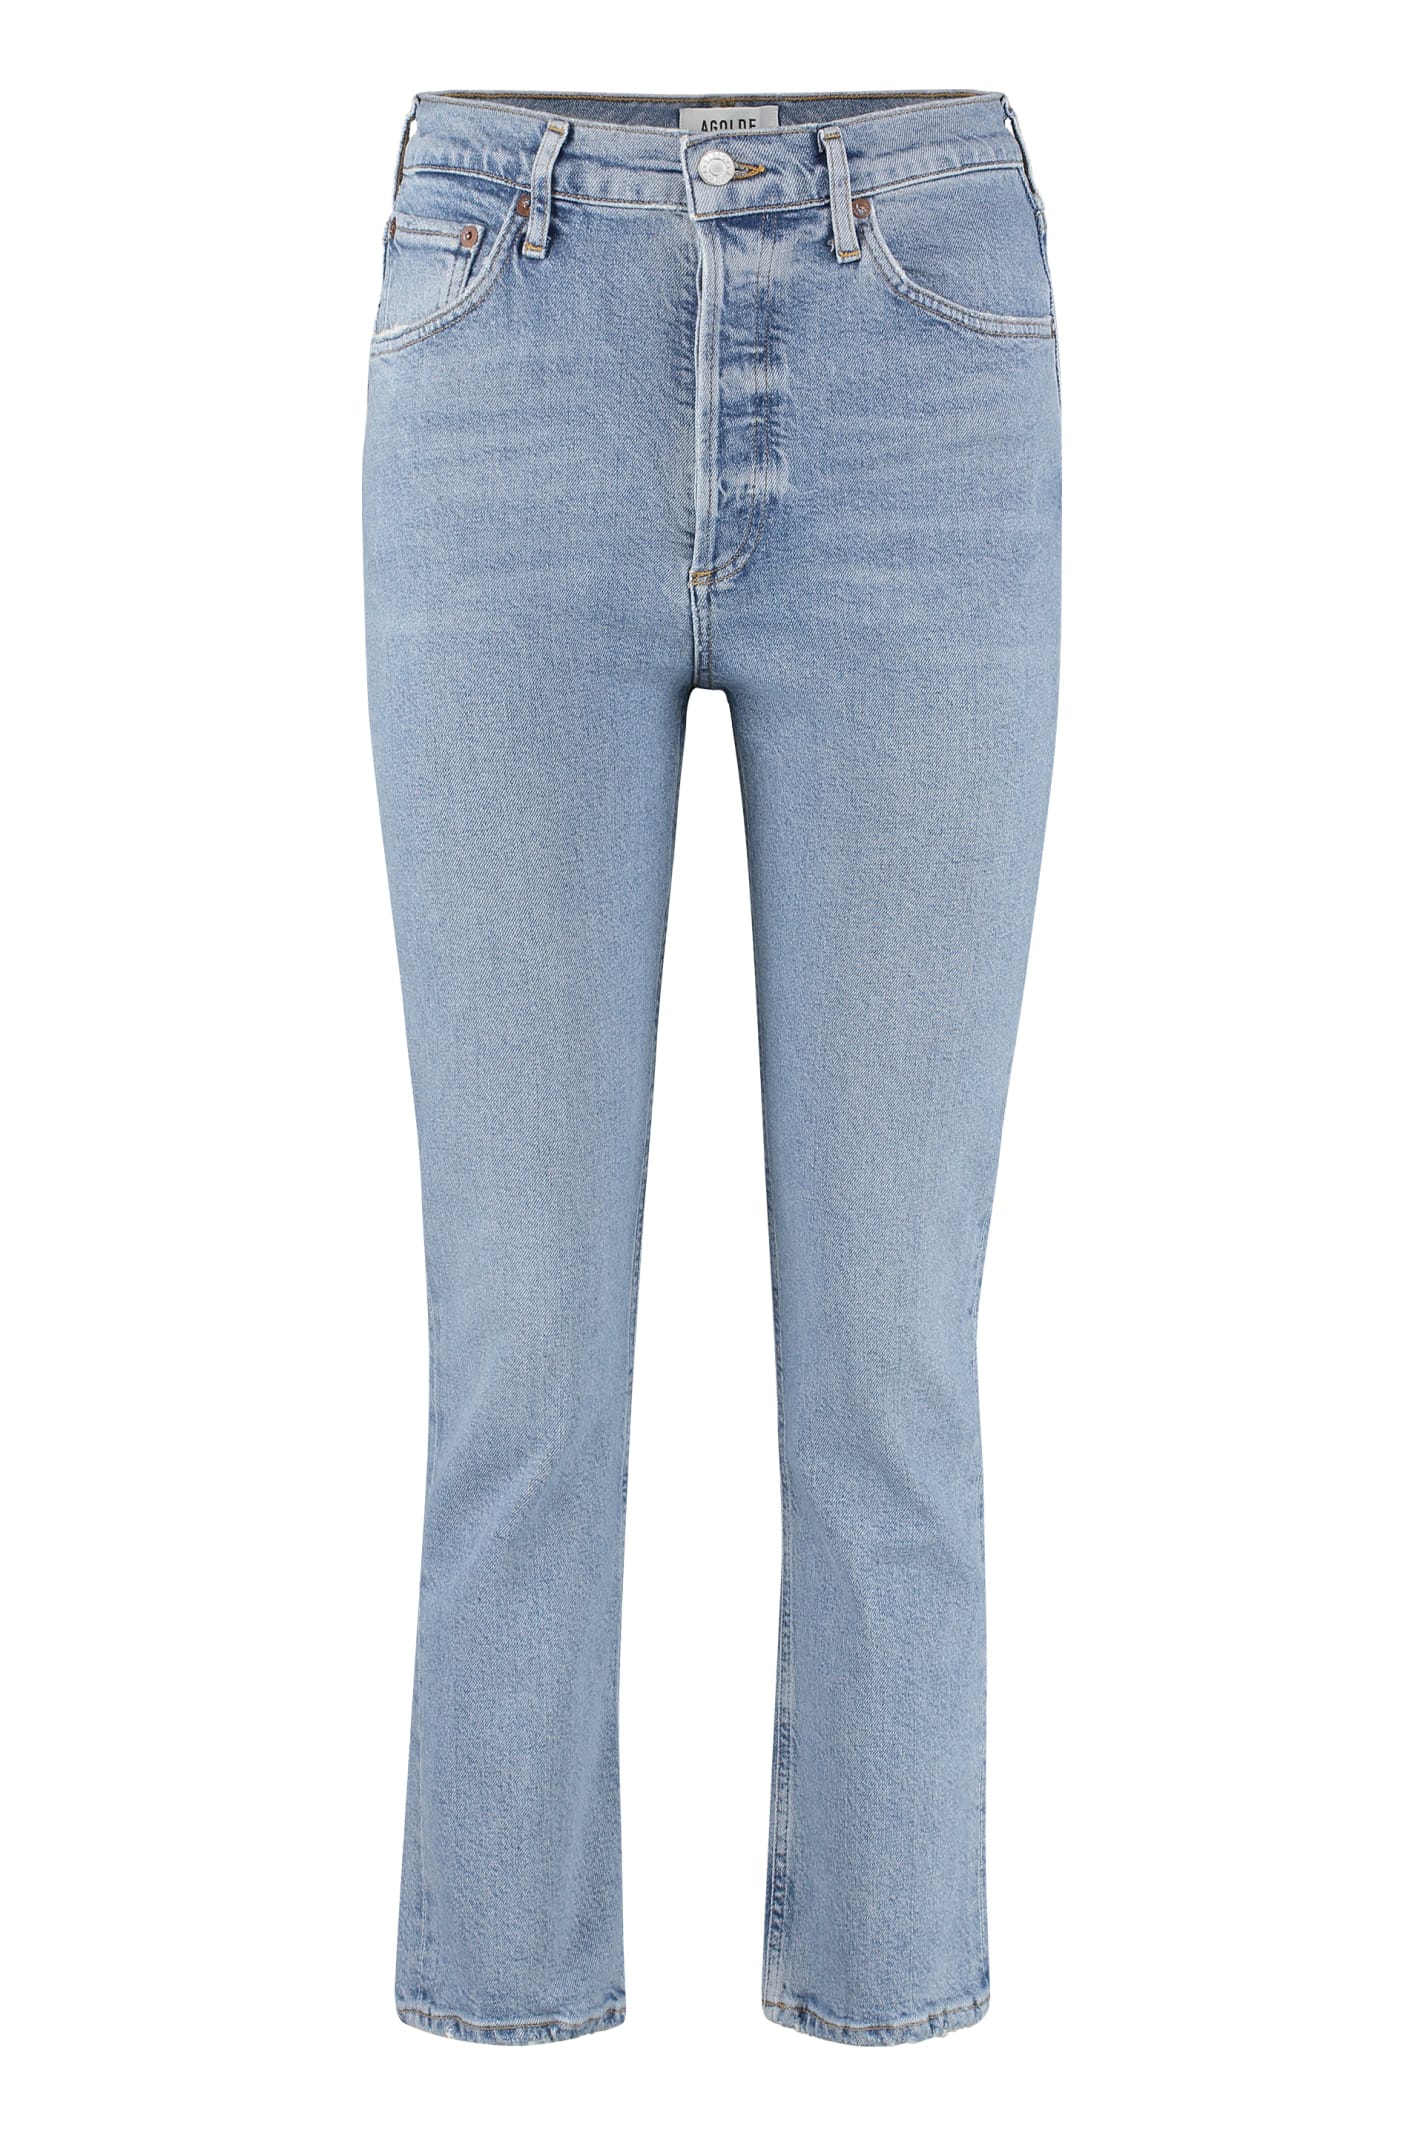 AGOLDE Riley Cropped Straight Leg Jeans